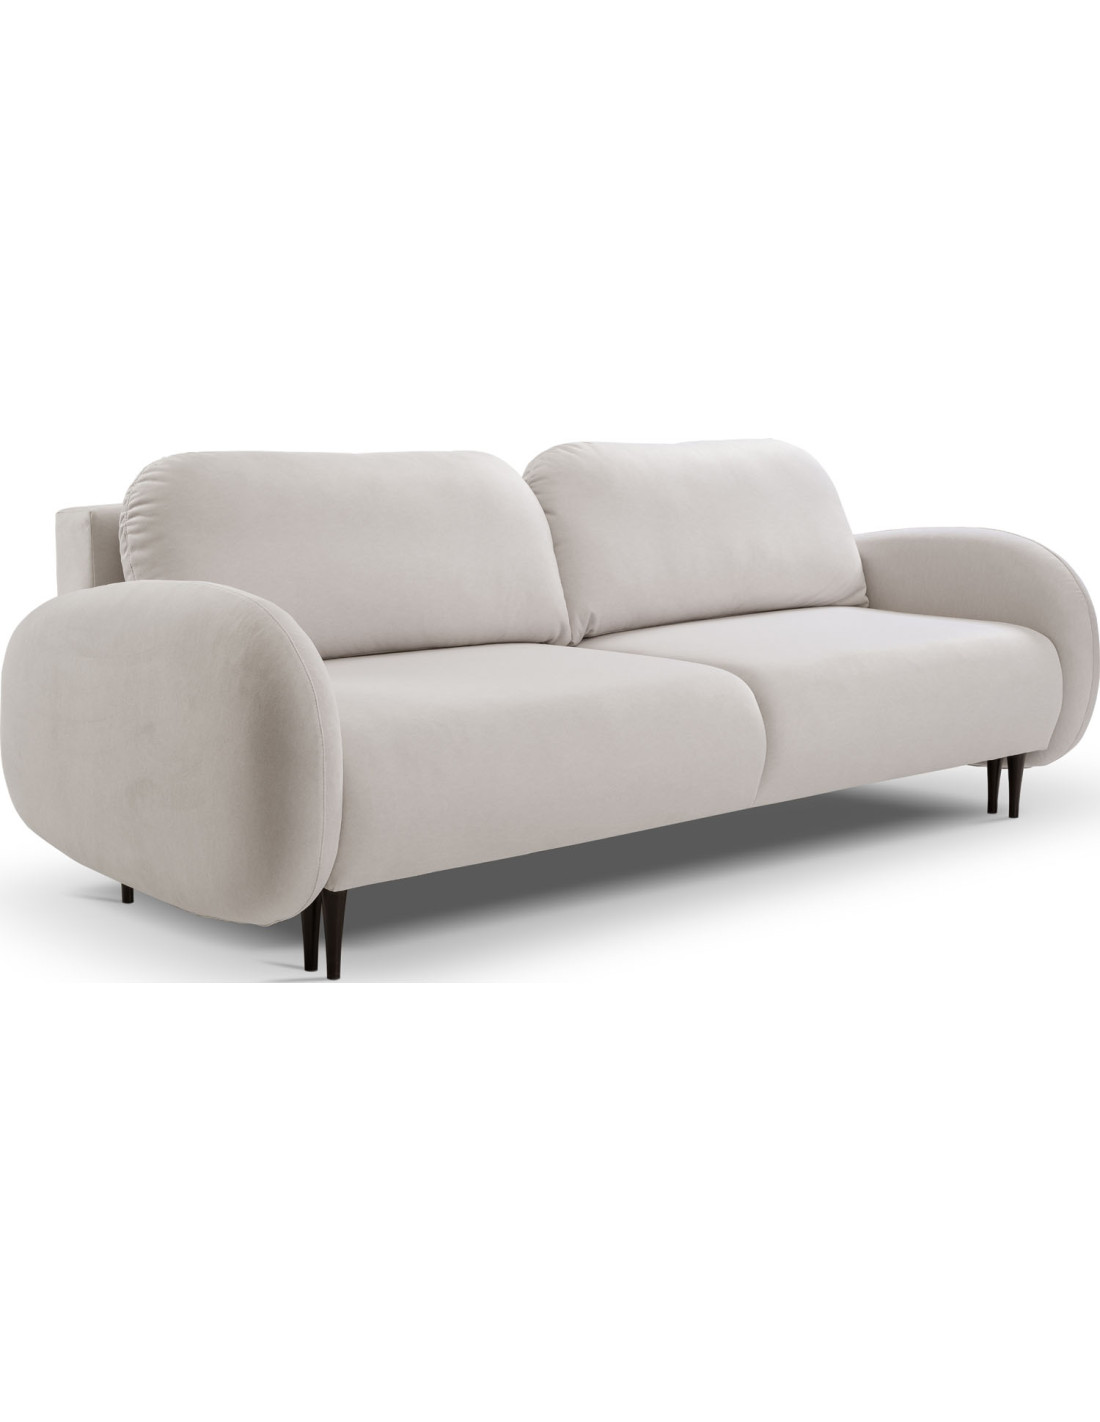 Sitzer Sofa Couch